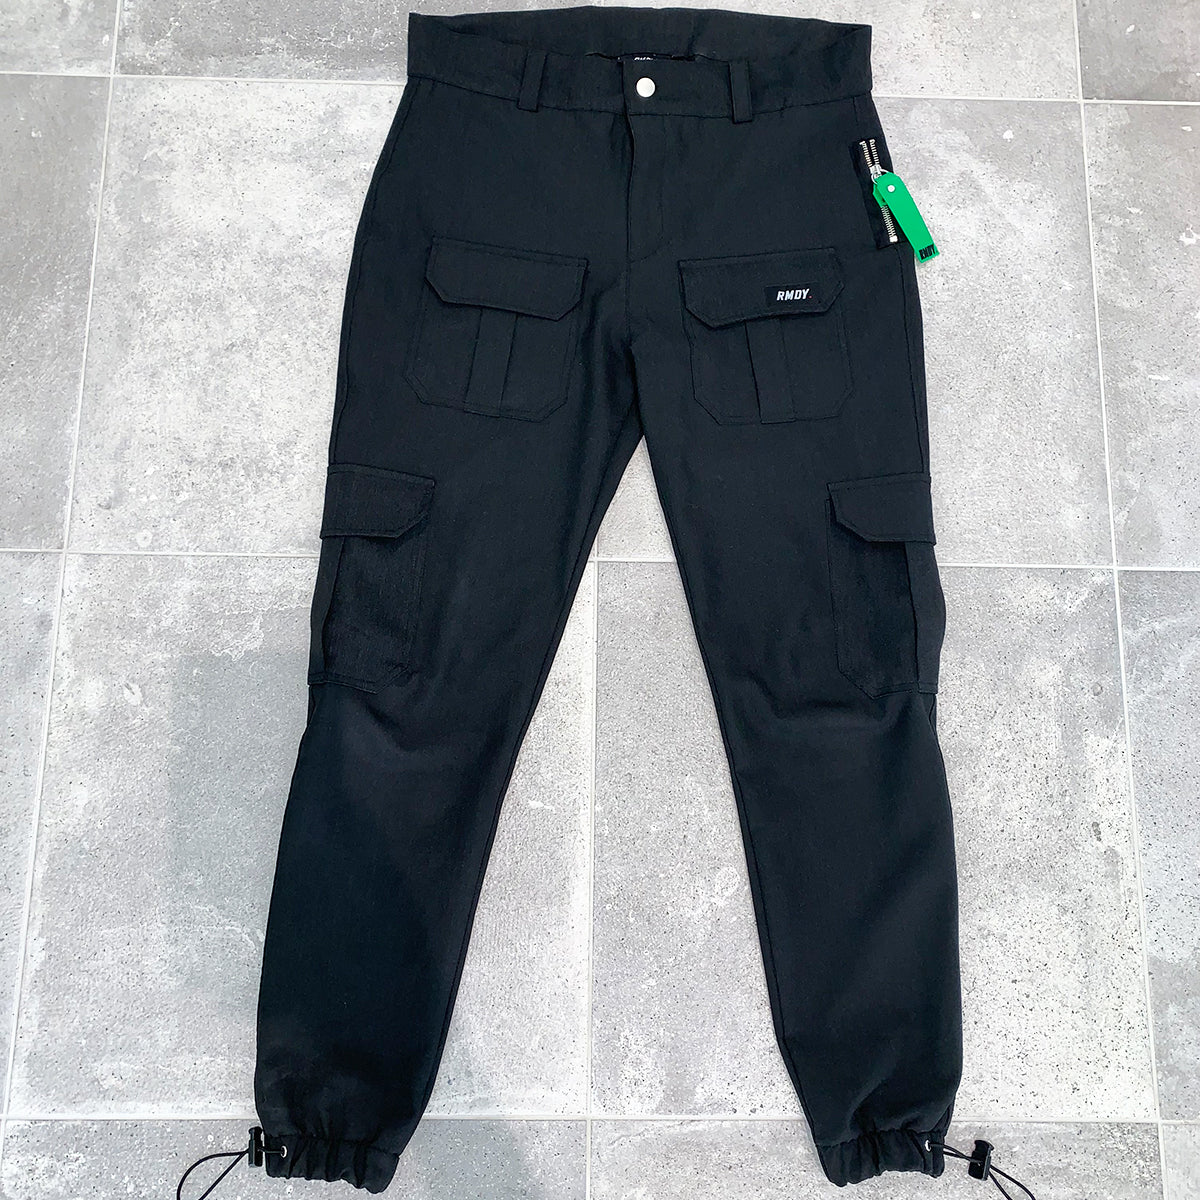 The Ultimate Cargo Pant - Coming Soon for AW19